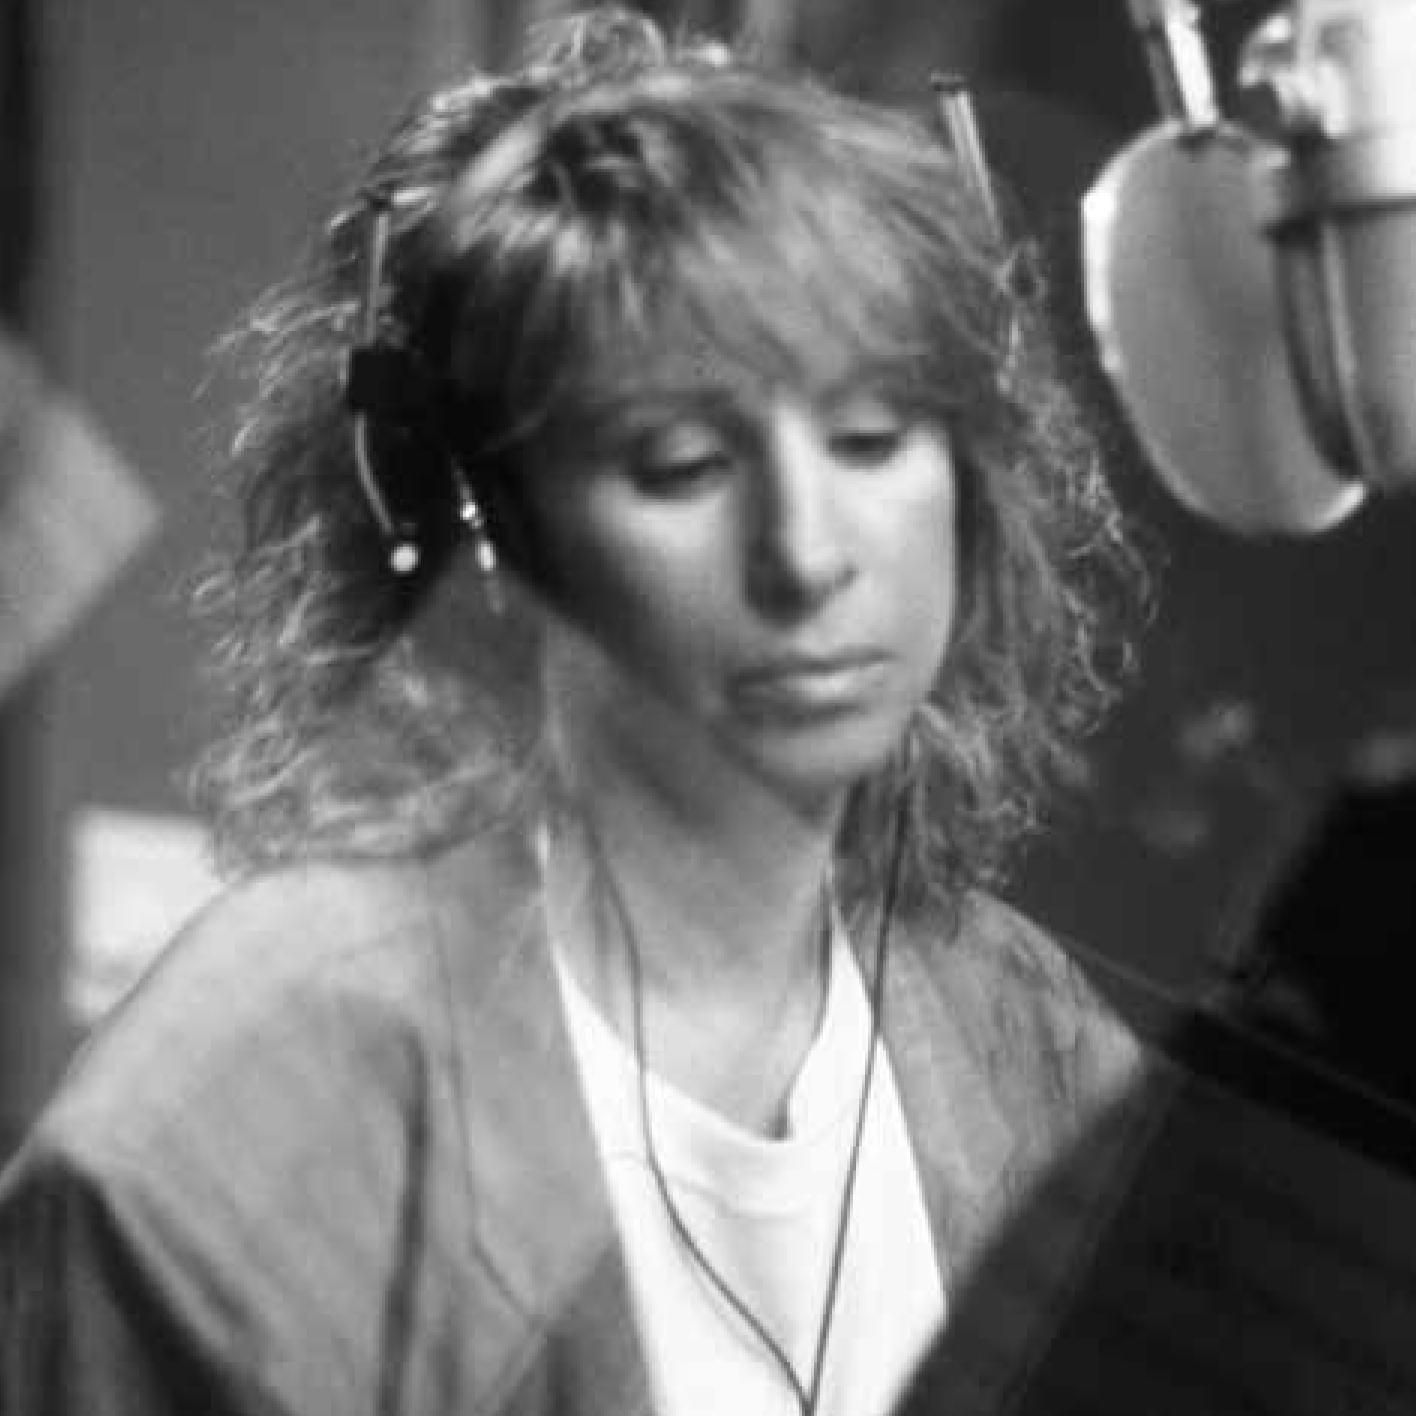 EXCLUSIVE: Listen to Barbra Streisand's Previously Unreleased 'Home'
